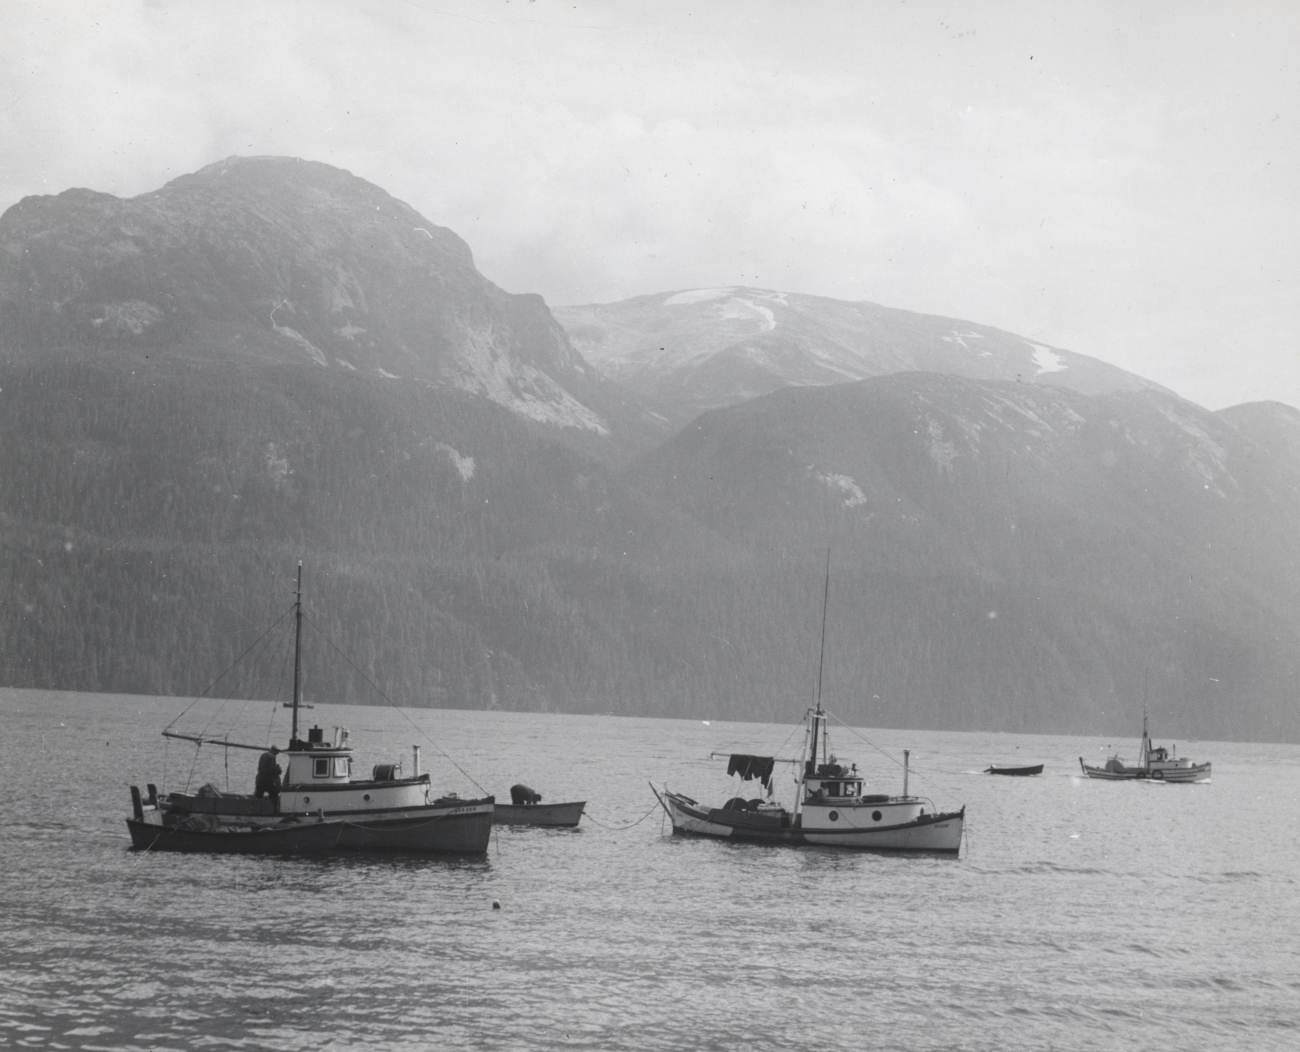 Small salmon boats anchored inshore with vessel underway offshore